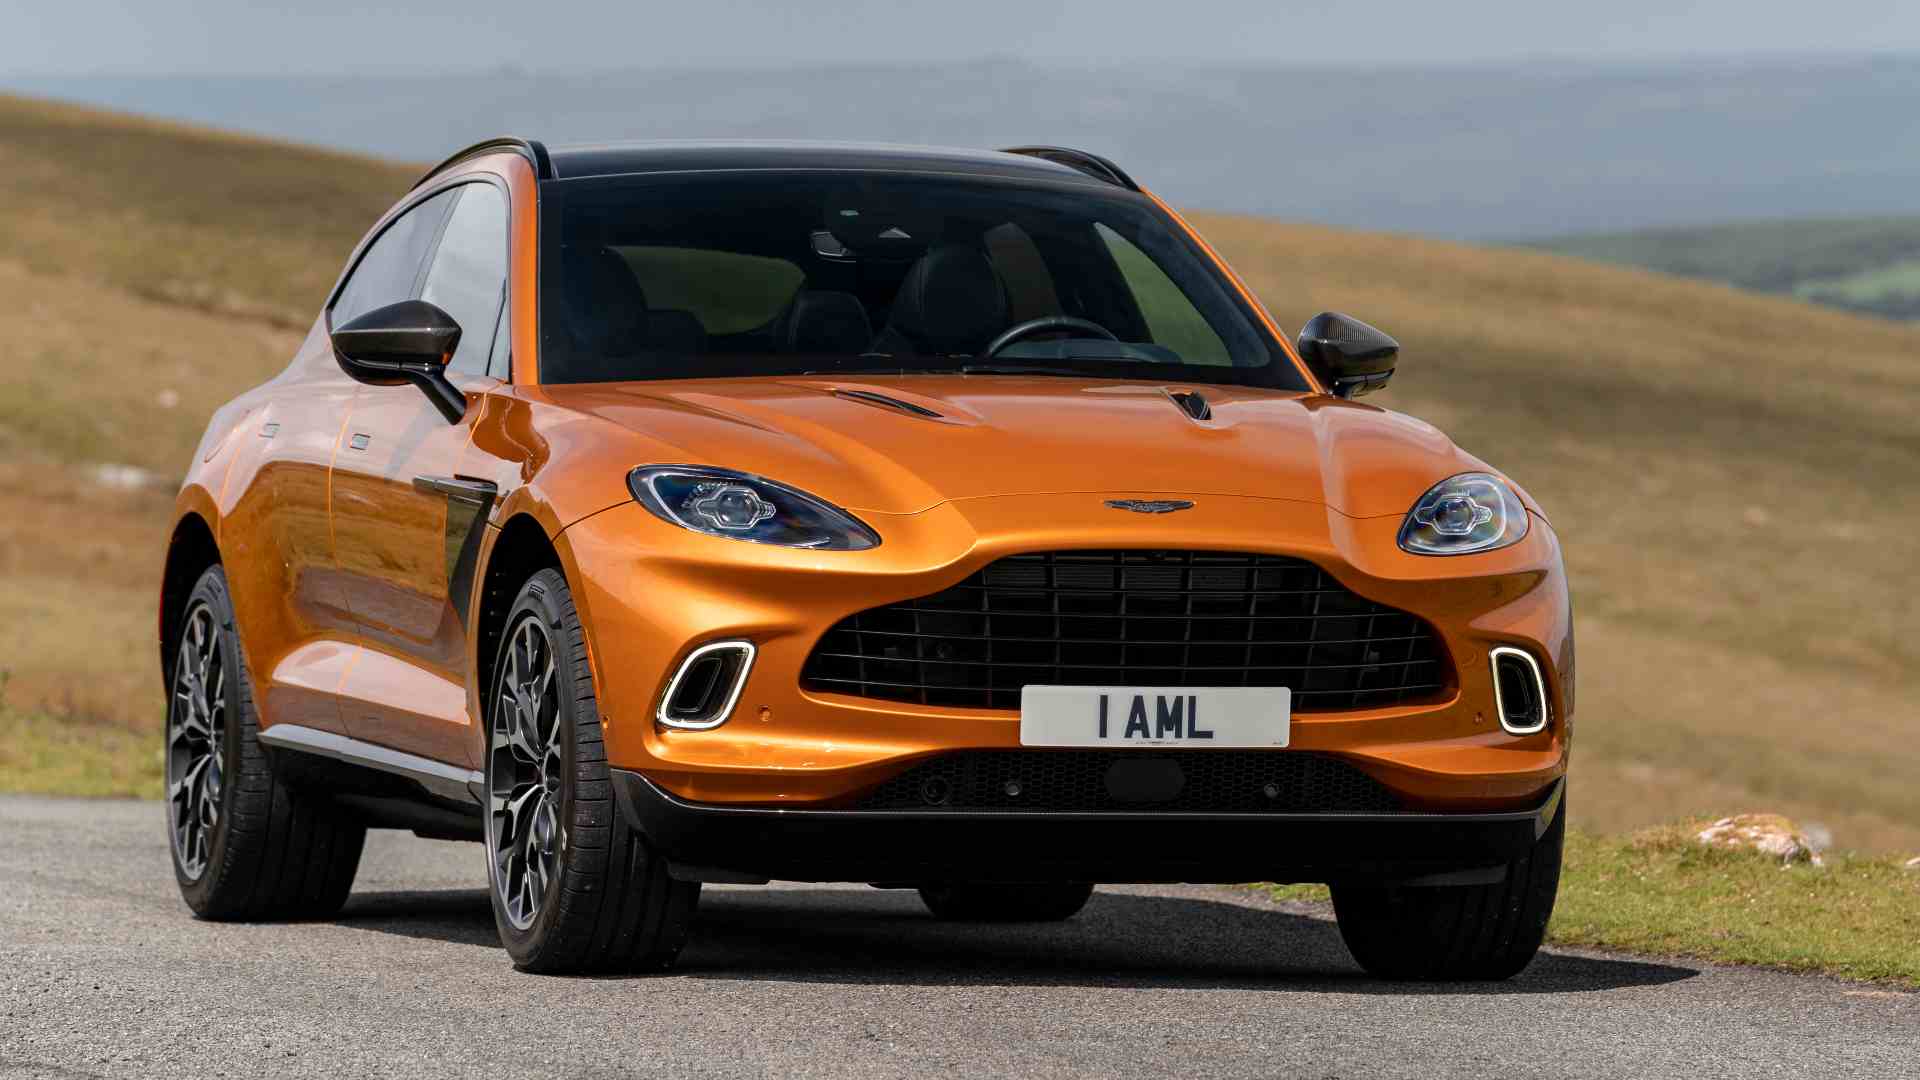 The plug-in hybrid version of the Aston Martin DBX SUV is expected to debut in 2023. Image: Aston Martin